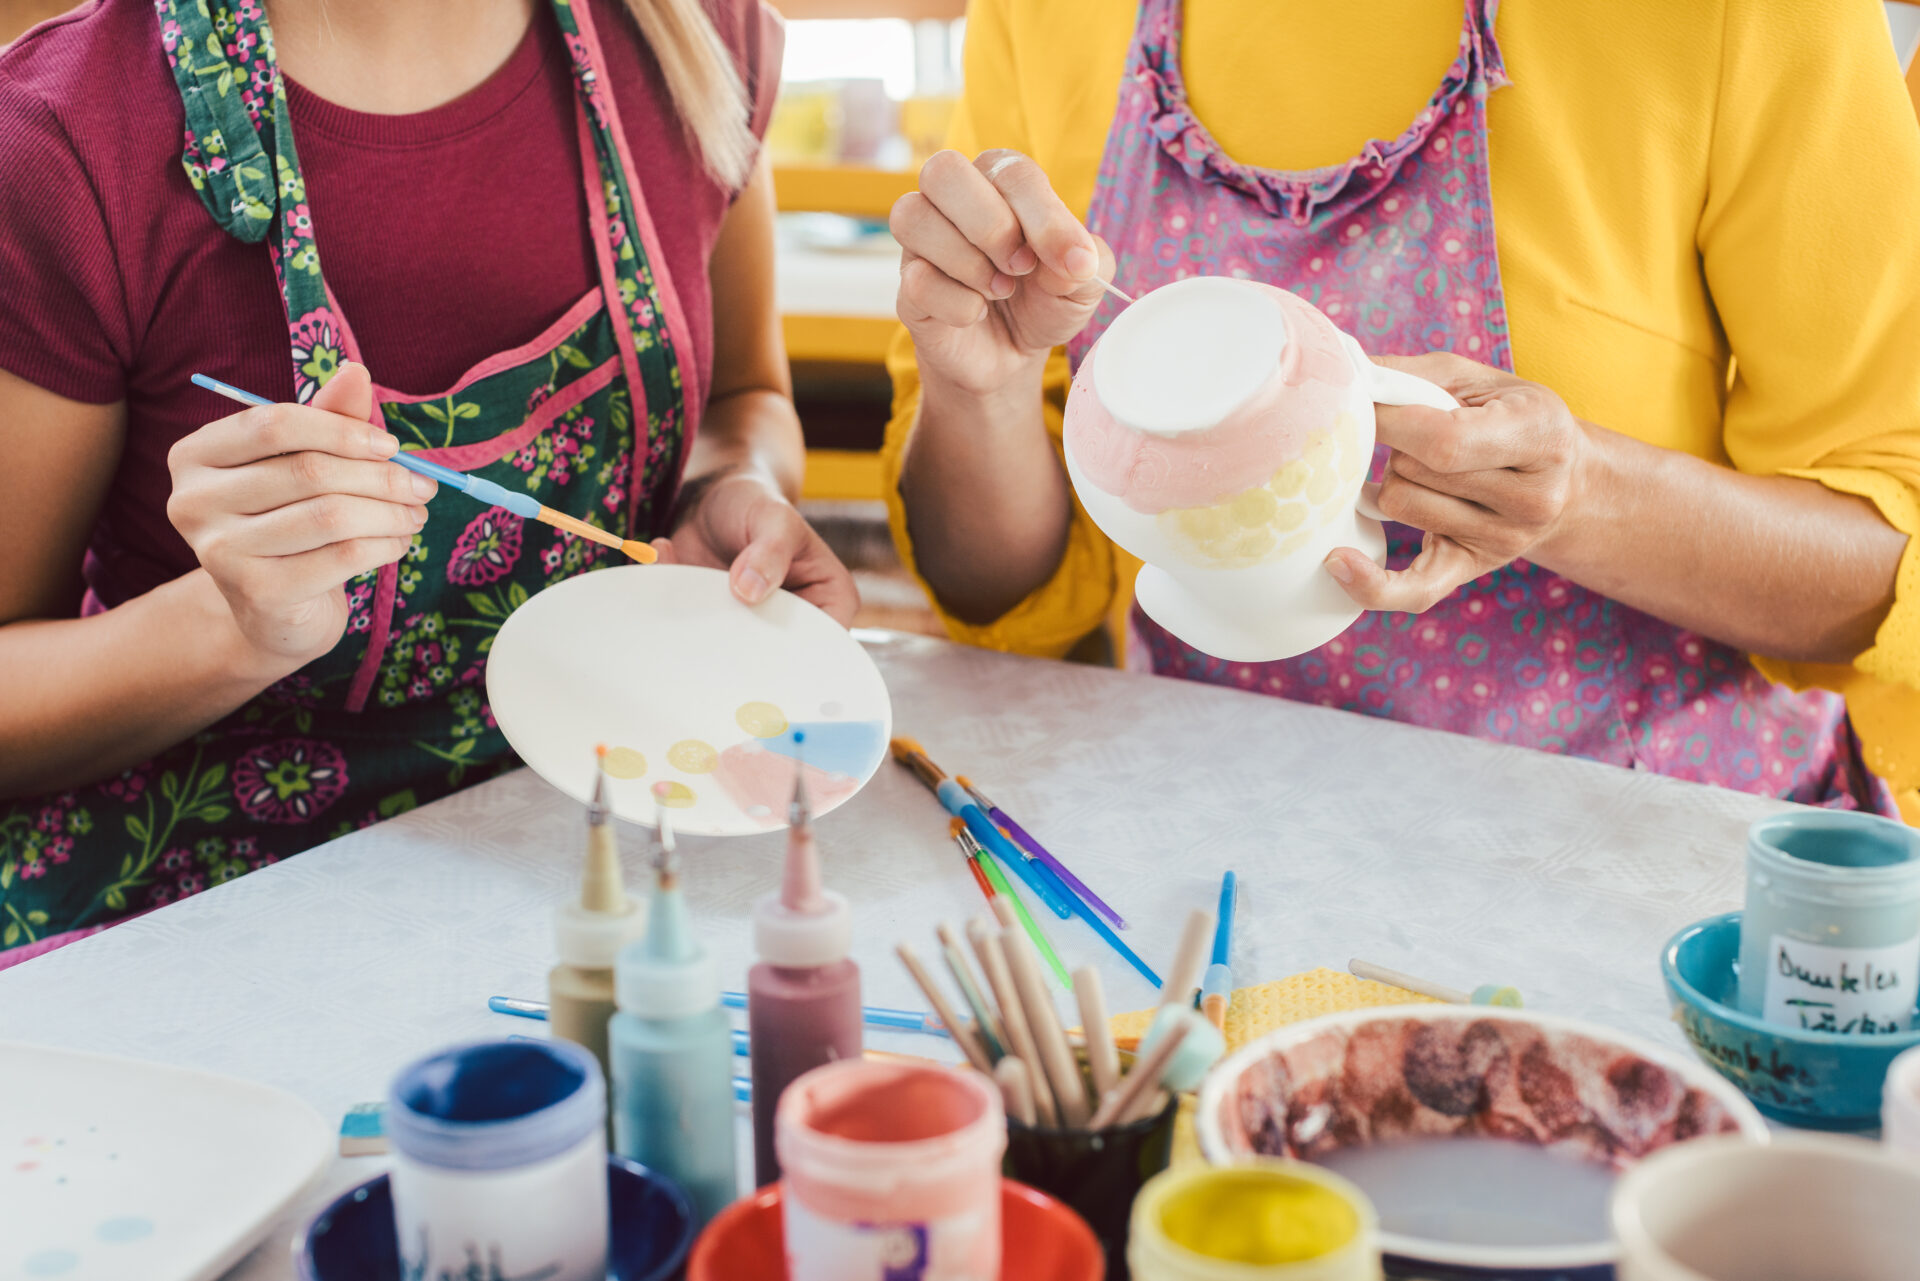 Women in DIY workshop coloring and decorating their own ceramic dishes